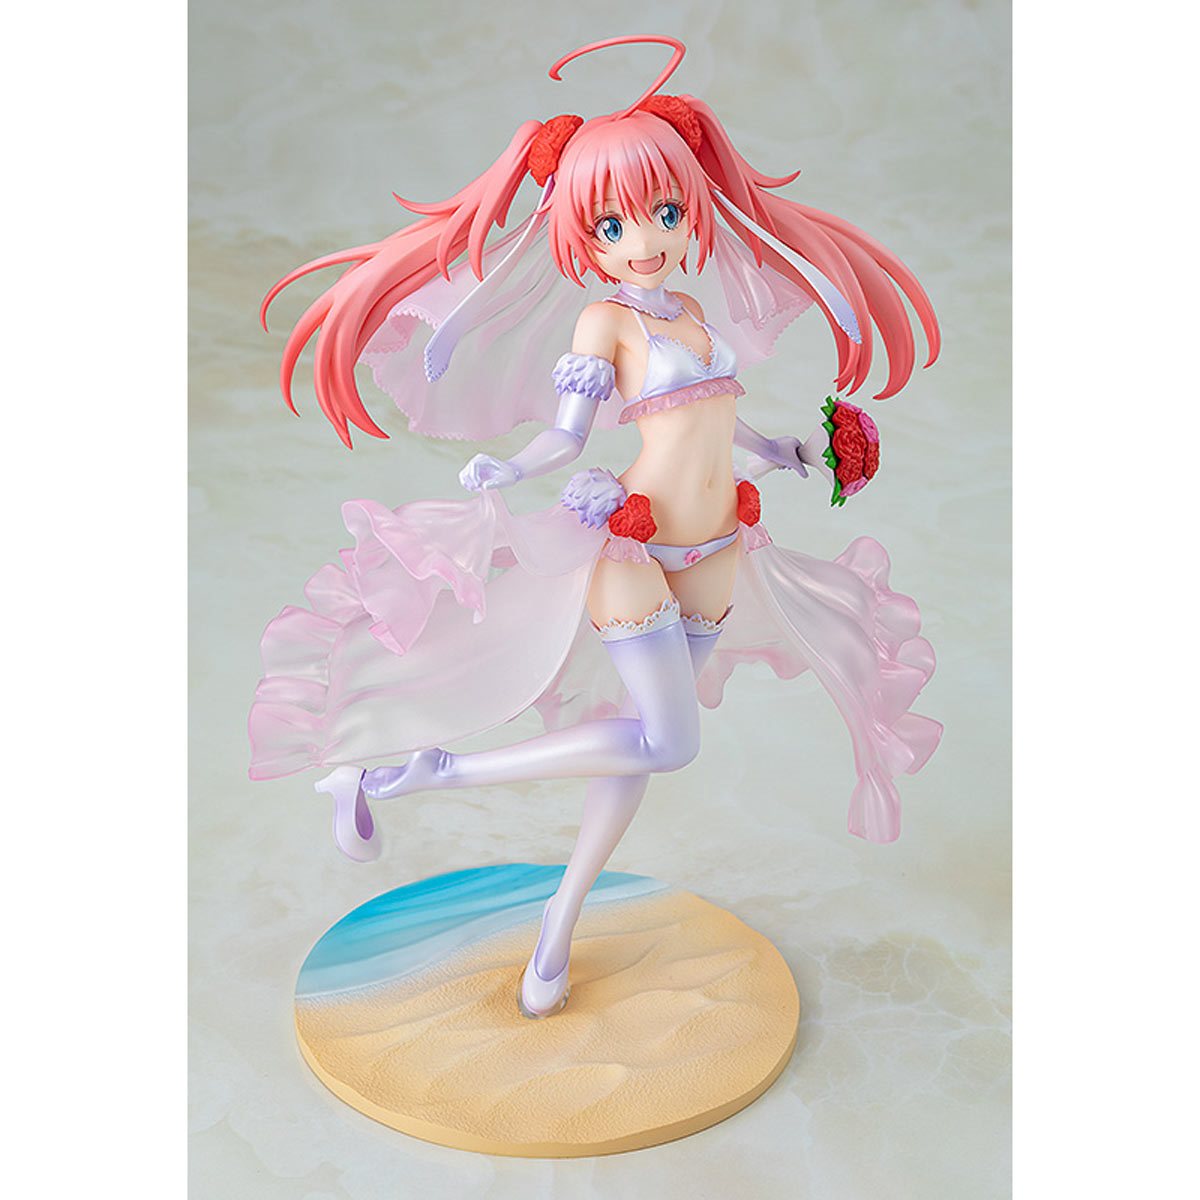 World's End Harem Miki Suo 1:6 Scale Statue